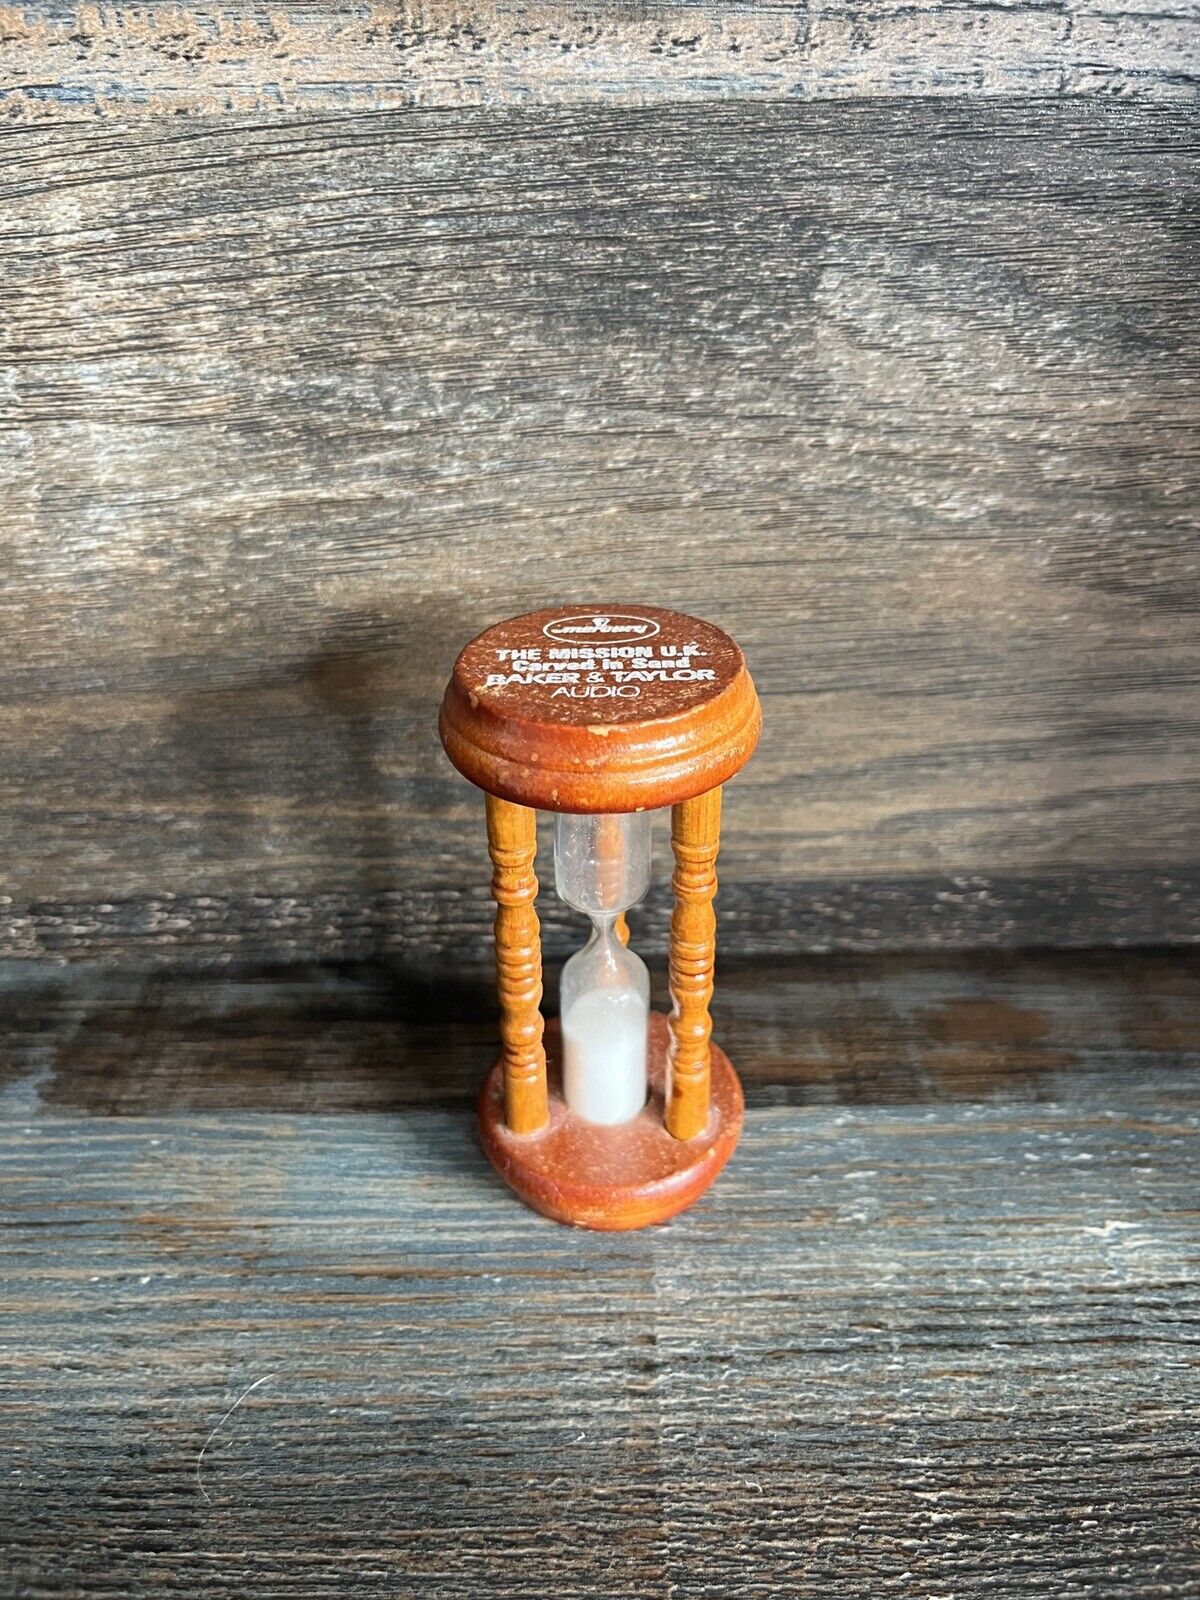 VERY RARE The Mission UK Promotional Egg Timer Carved in Sand Album